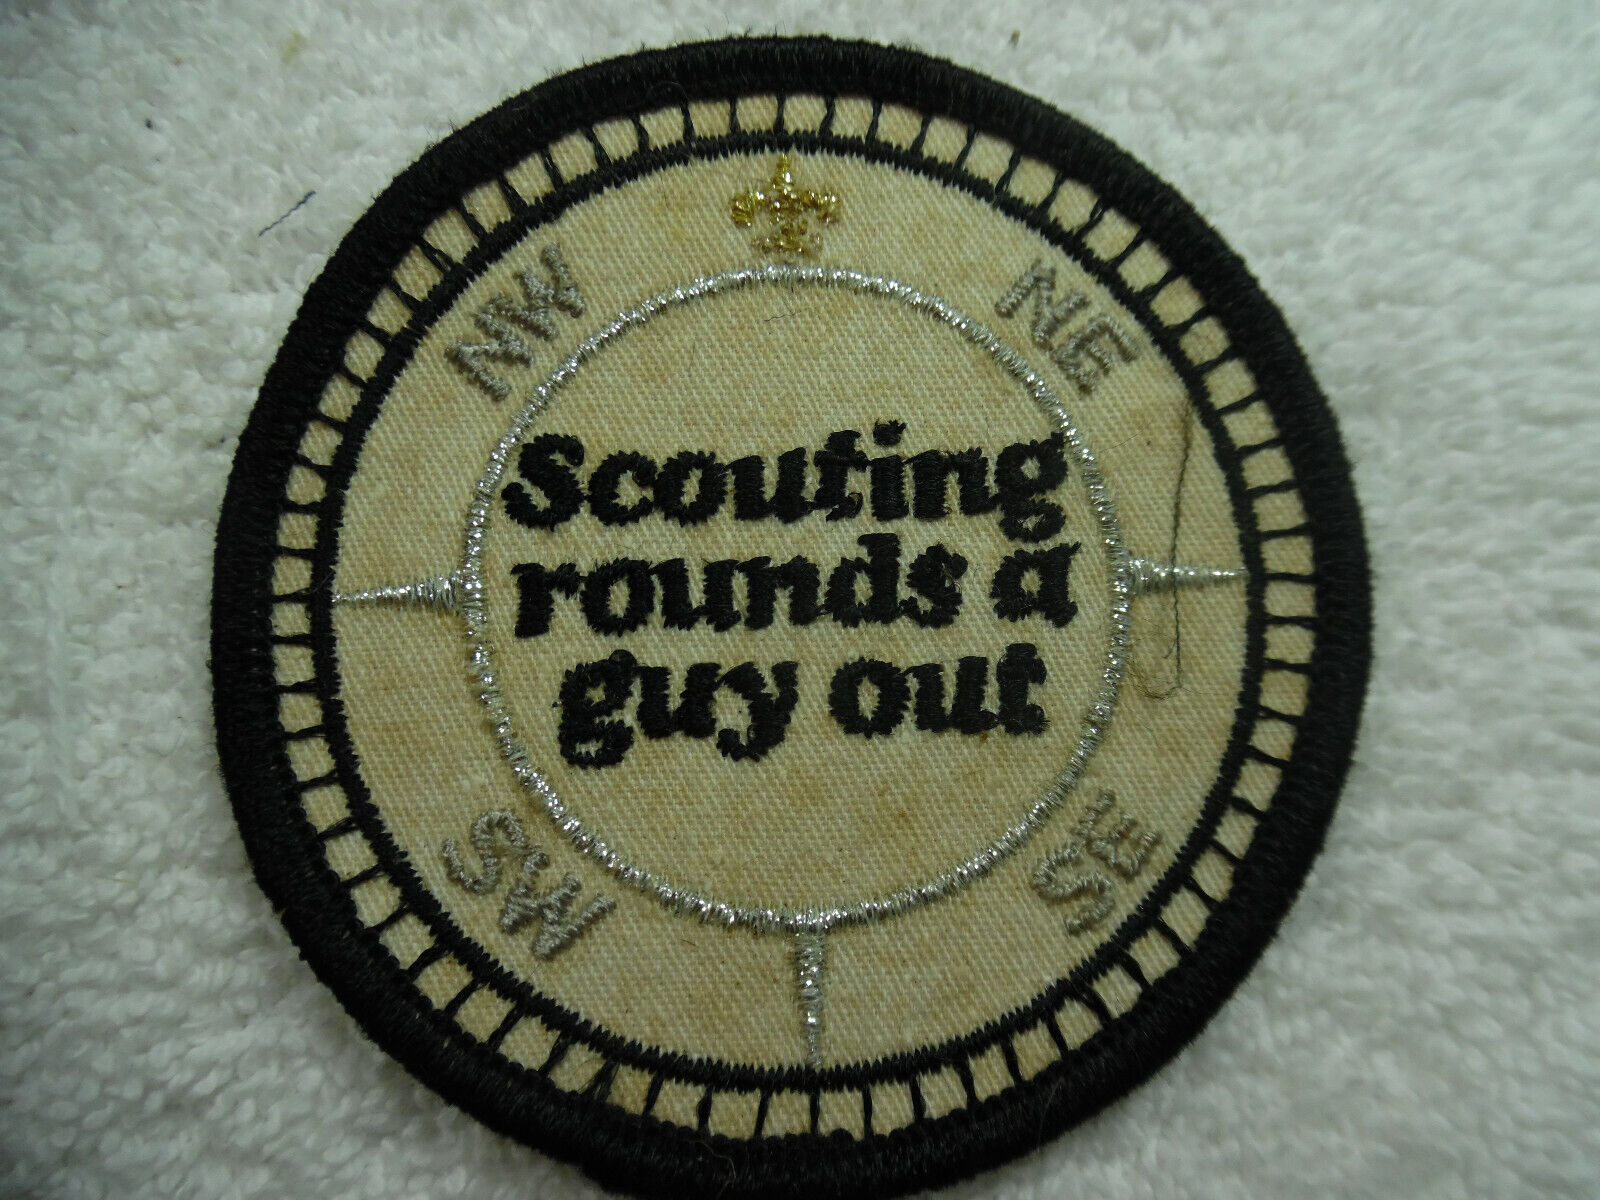 Boy Scout Patch Scouting Rounds a Guy Out 160-33A122